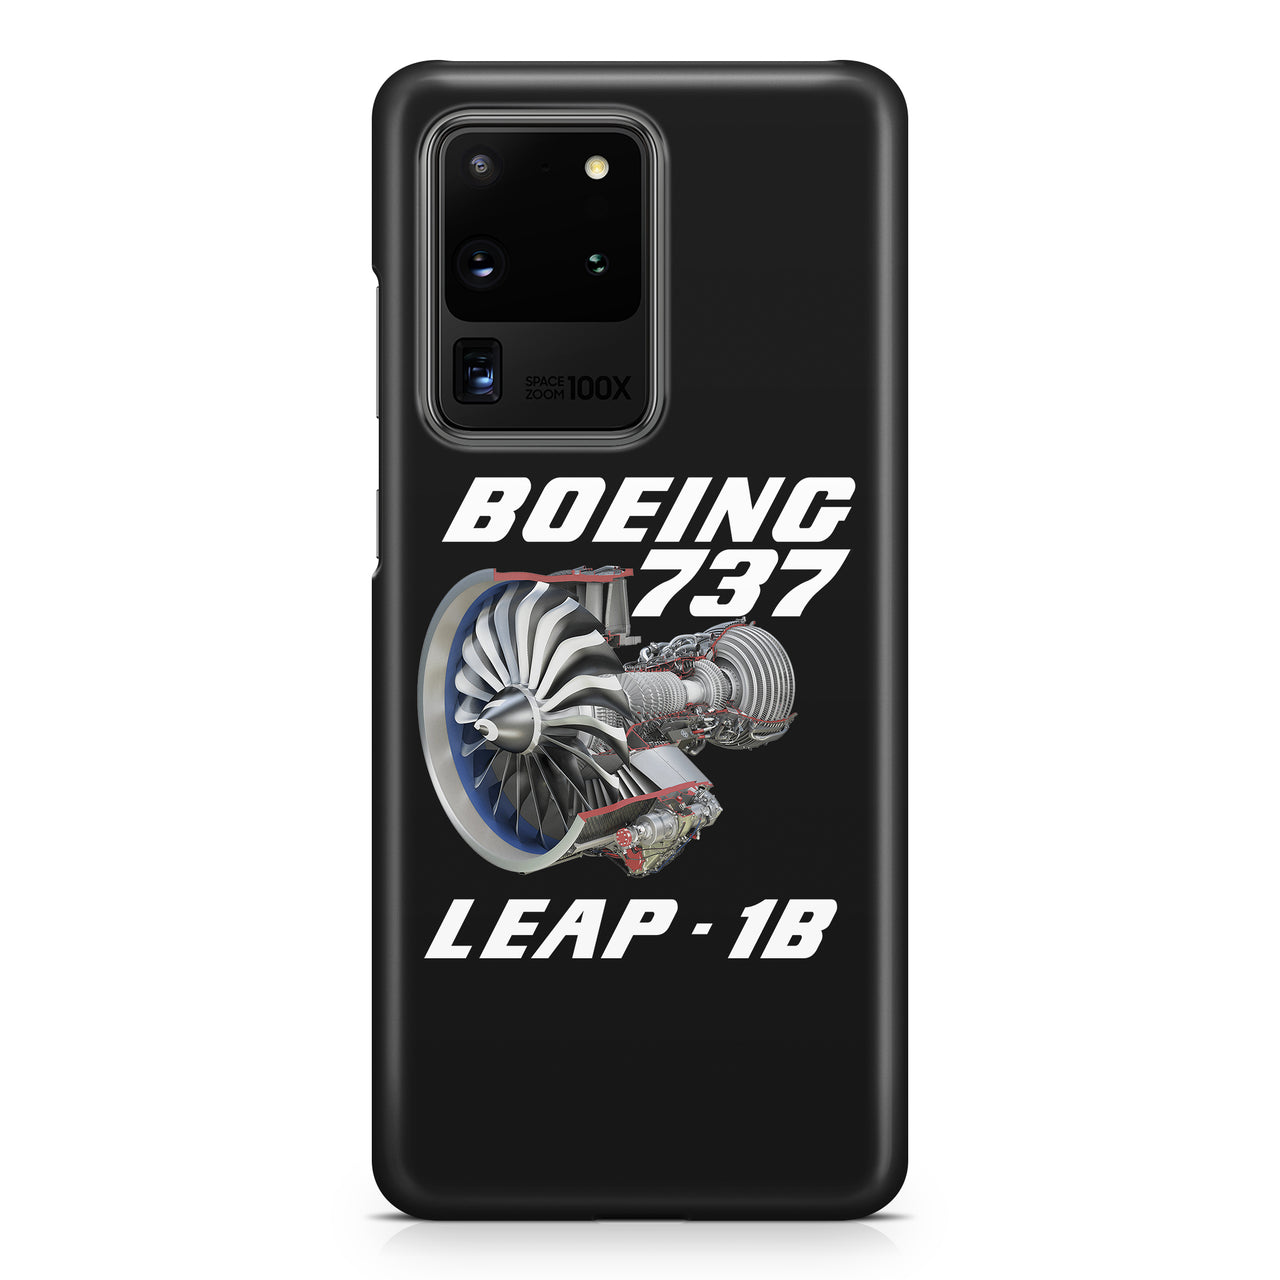 Boeing 737 & Leap 1B Samsung A Cases